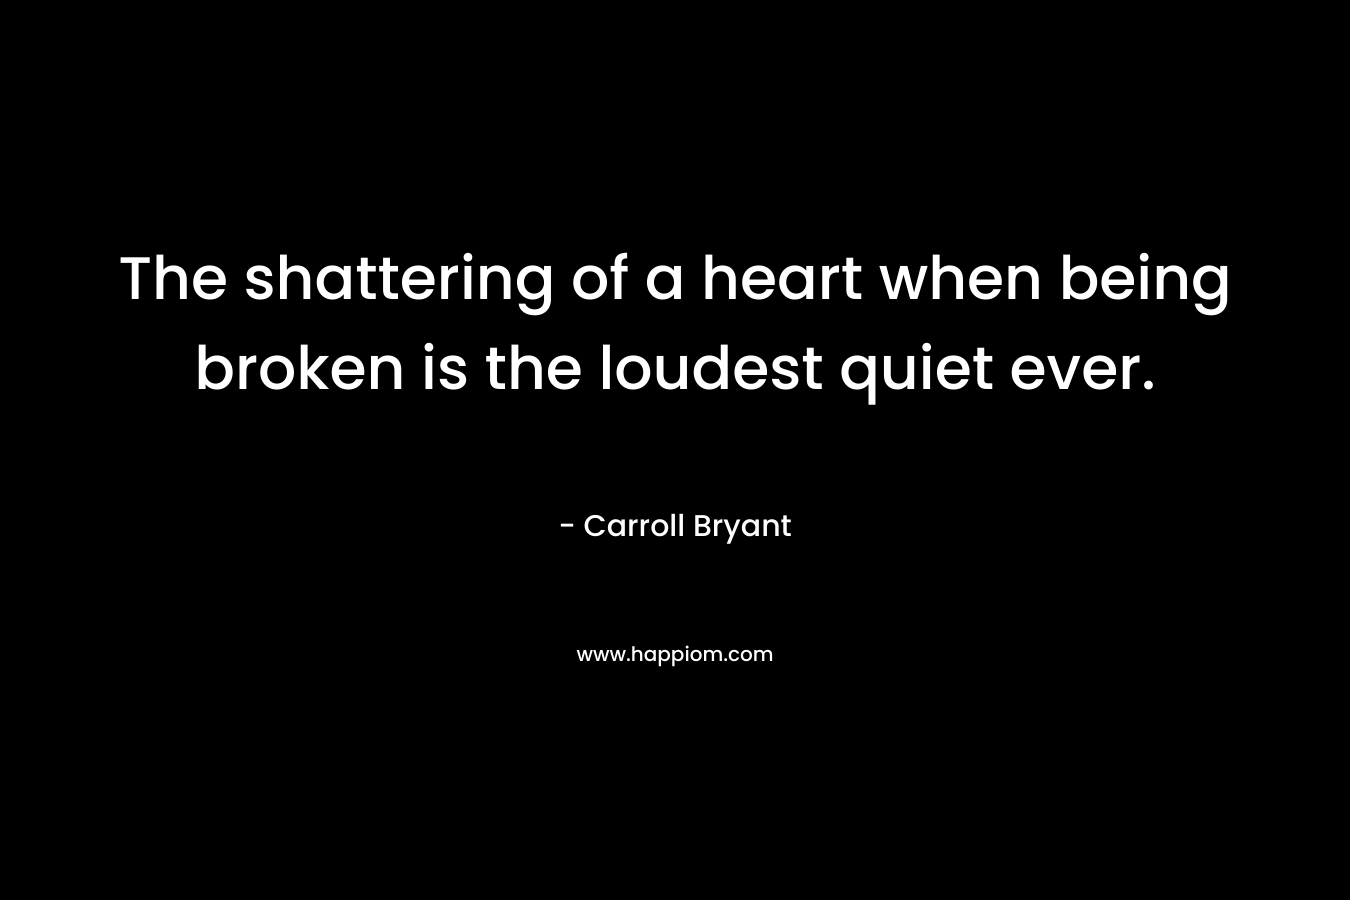 The shattering of a heart when being broken is the loudest quiet ever. – Carroll Bryant